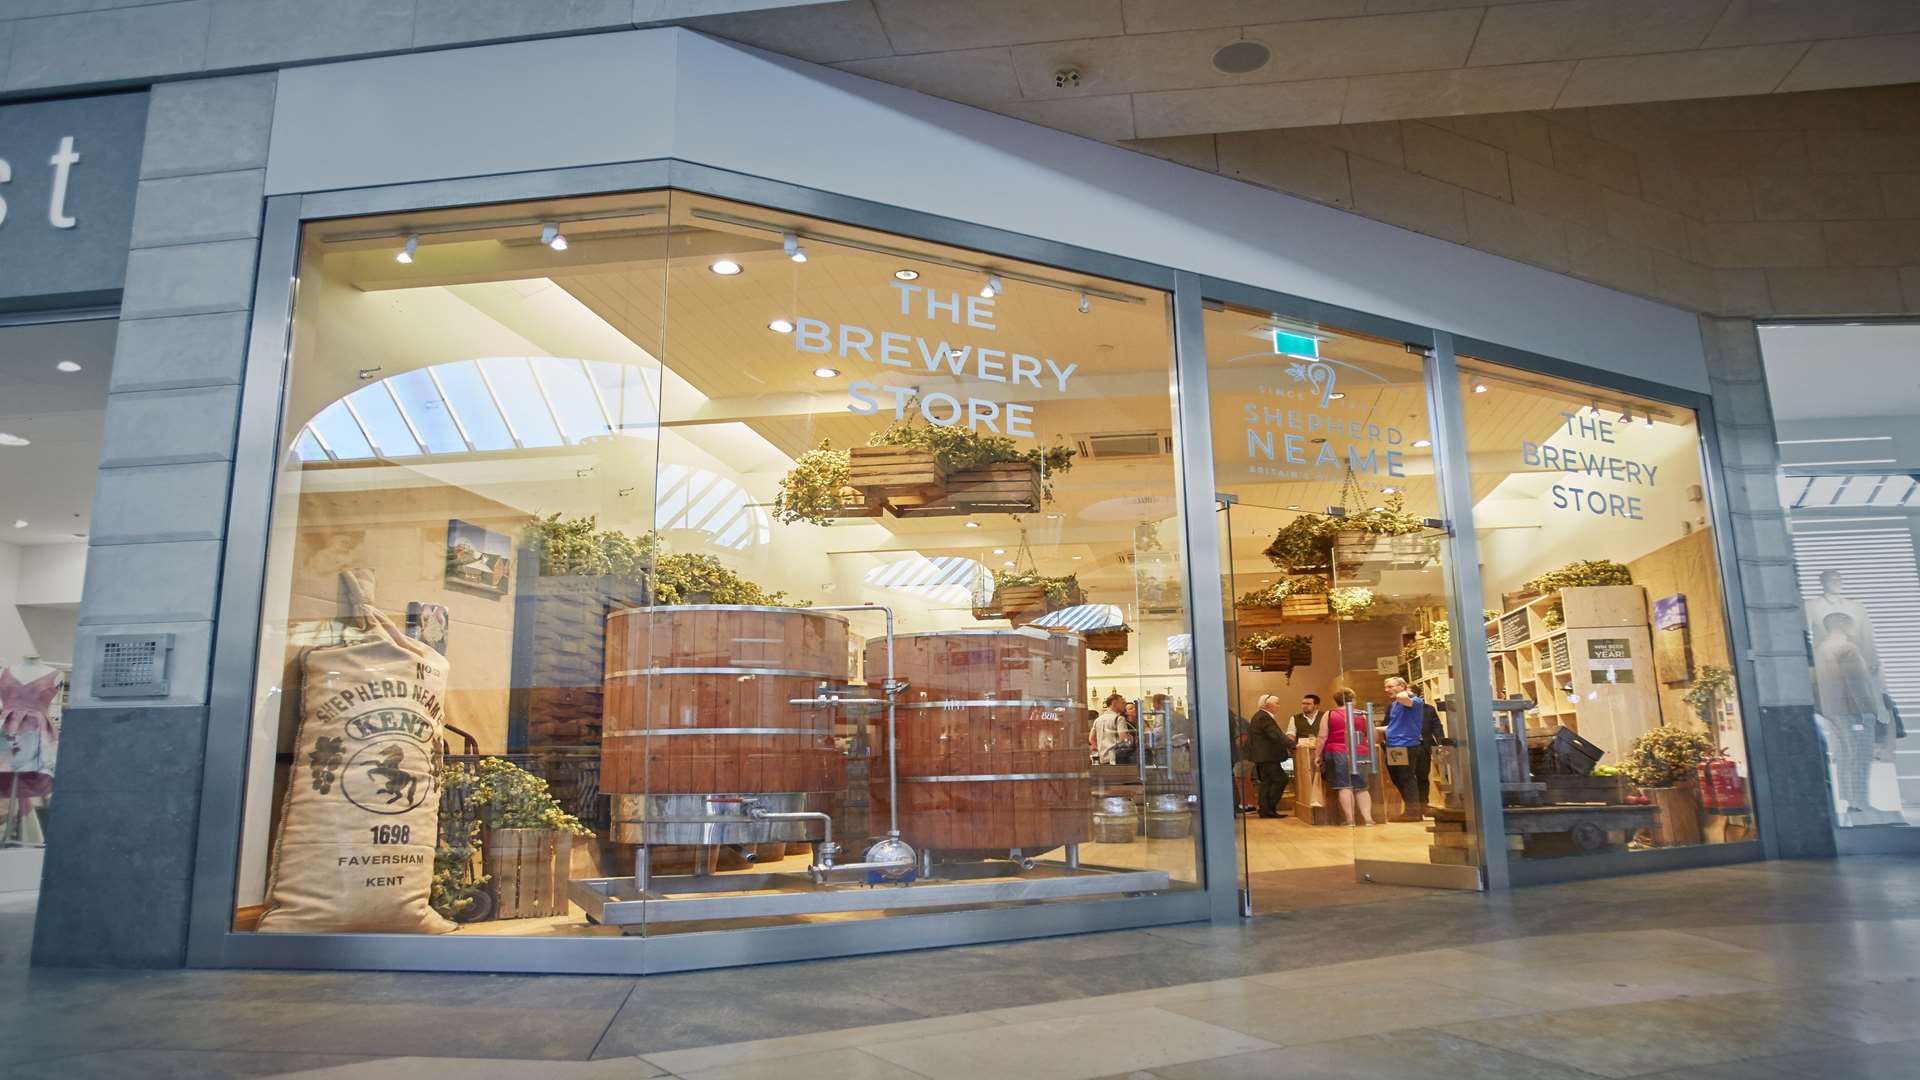 Shepherd Neame has opened a pop-up shop at Bluewater